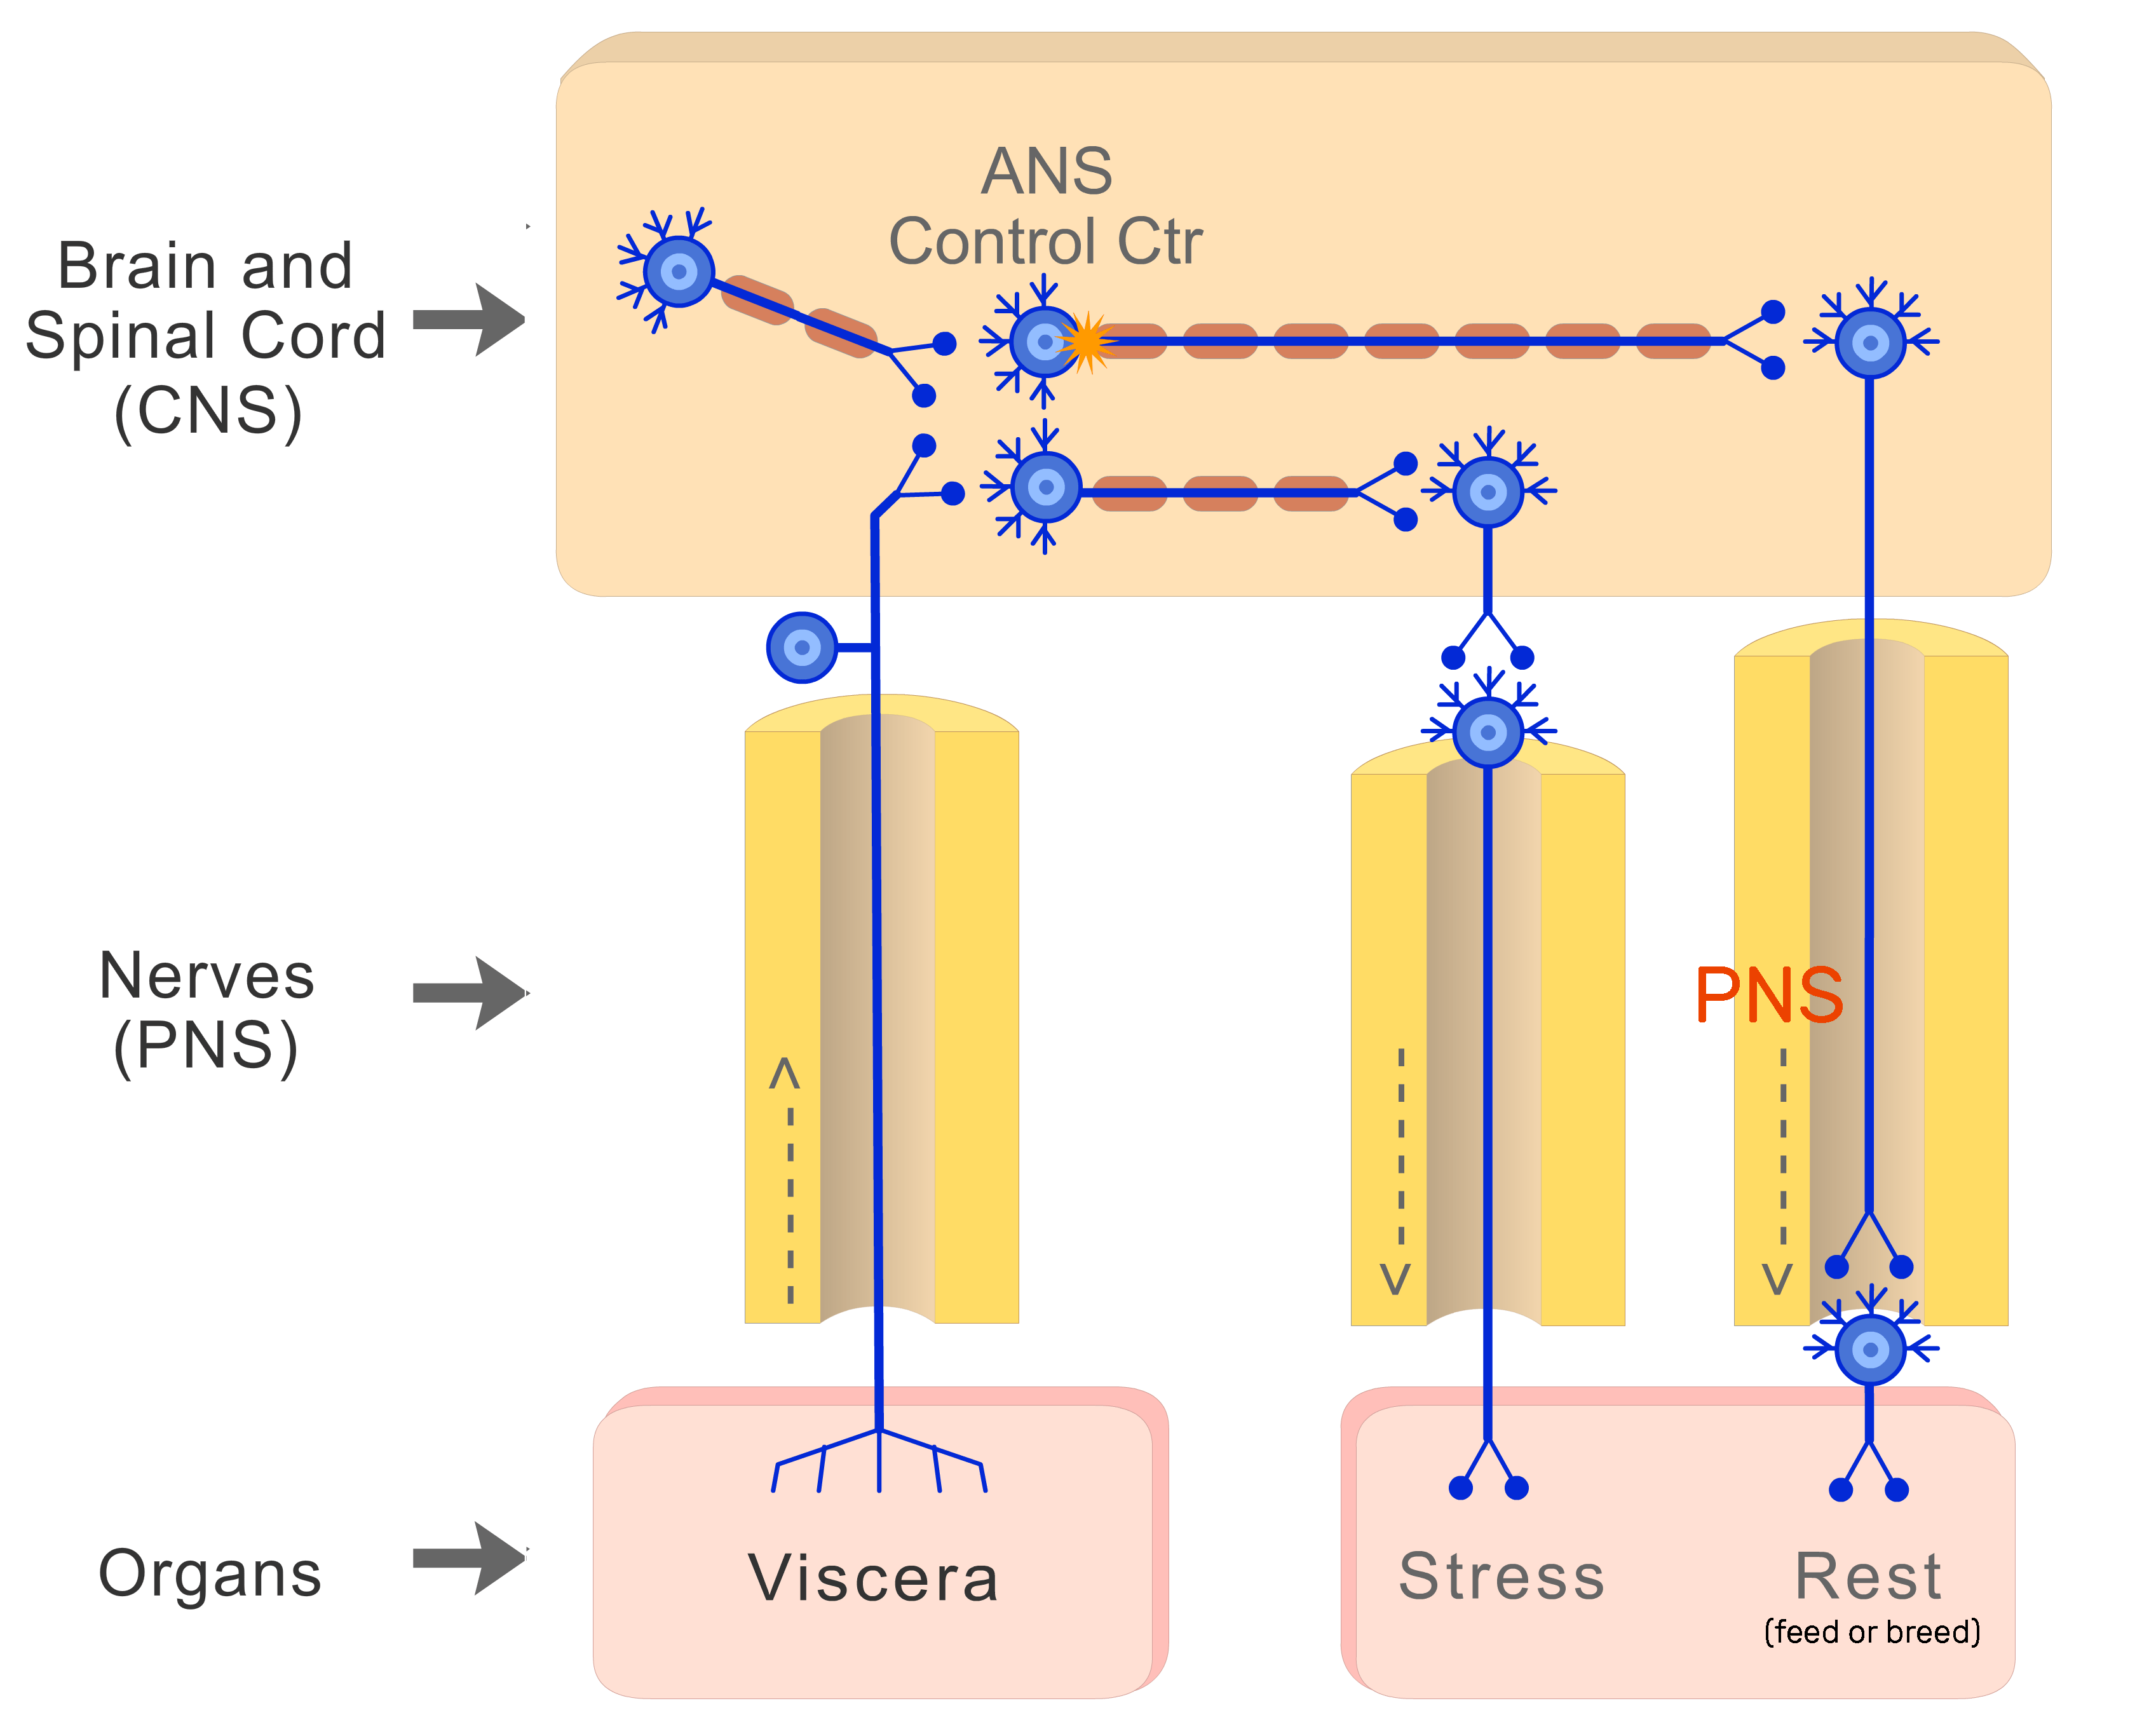 An image showing the action potential moves through PNS (parasympathetic nervous system) neuron from the CNS to reach viscera (Feed or breed)